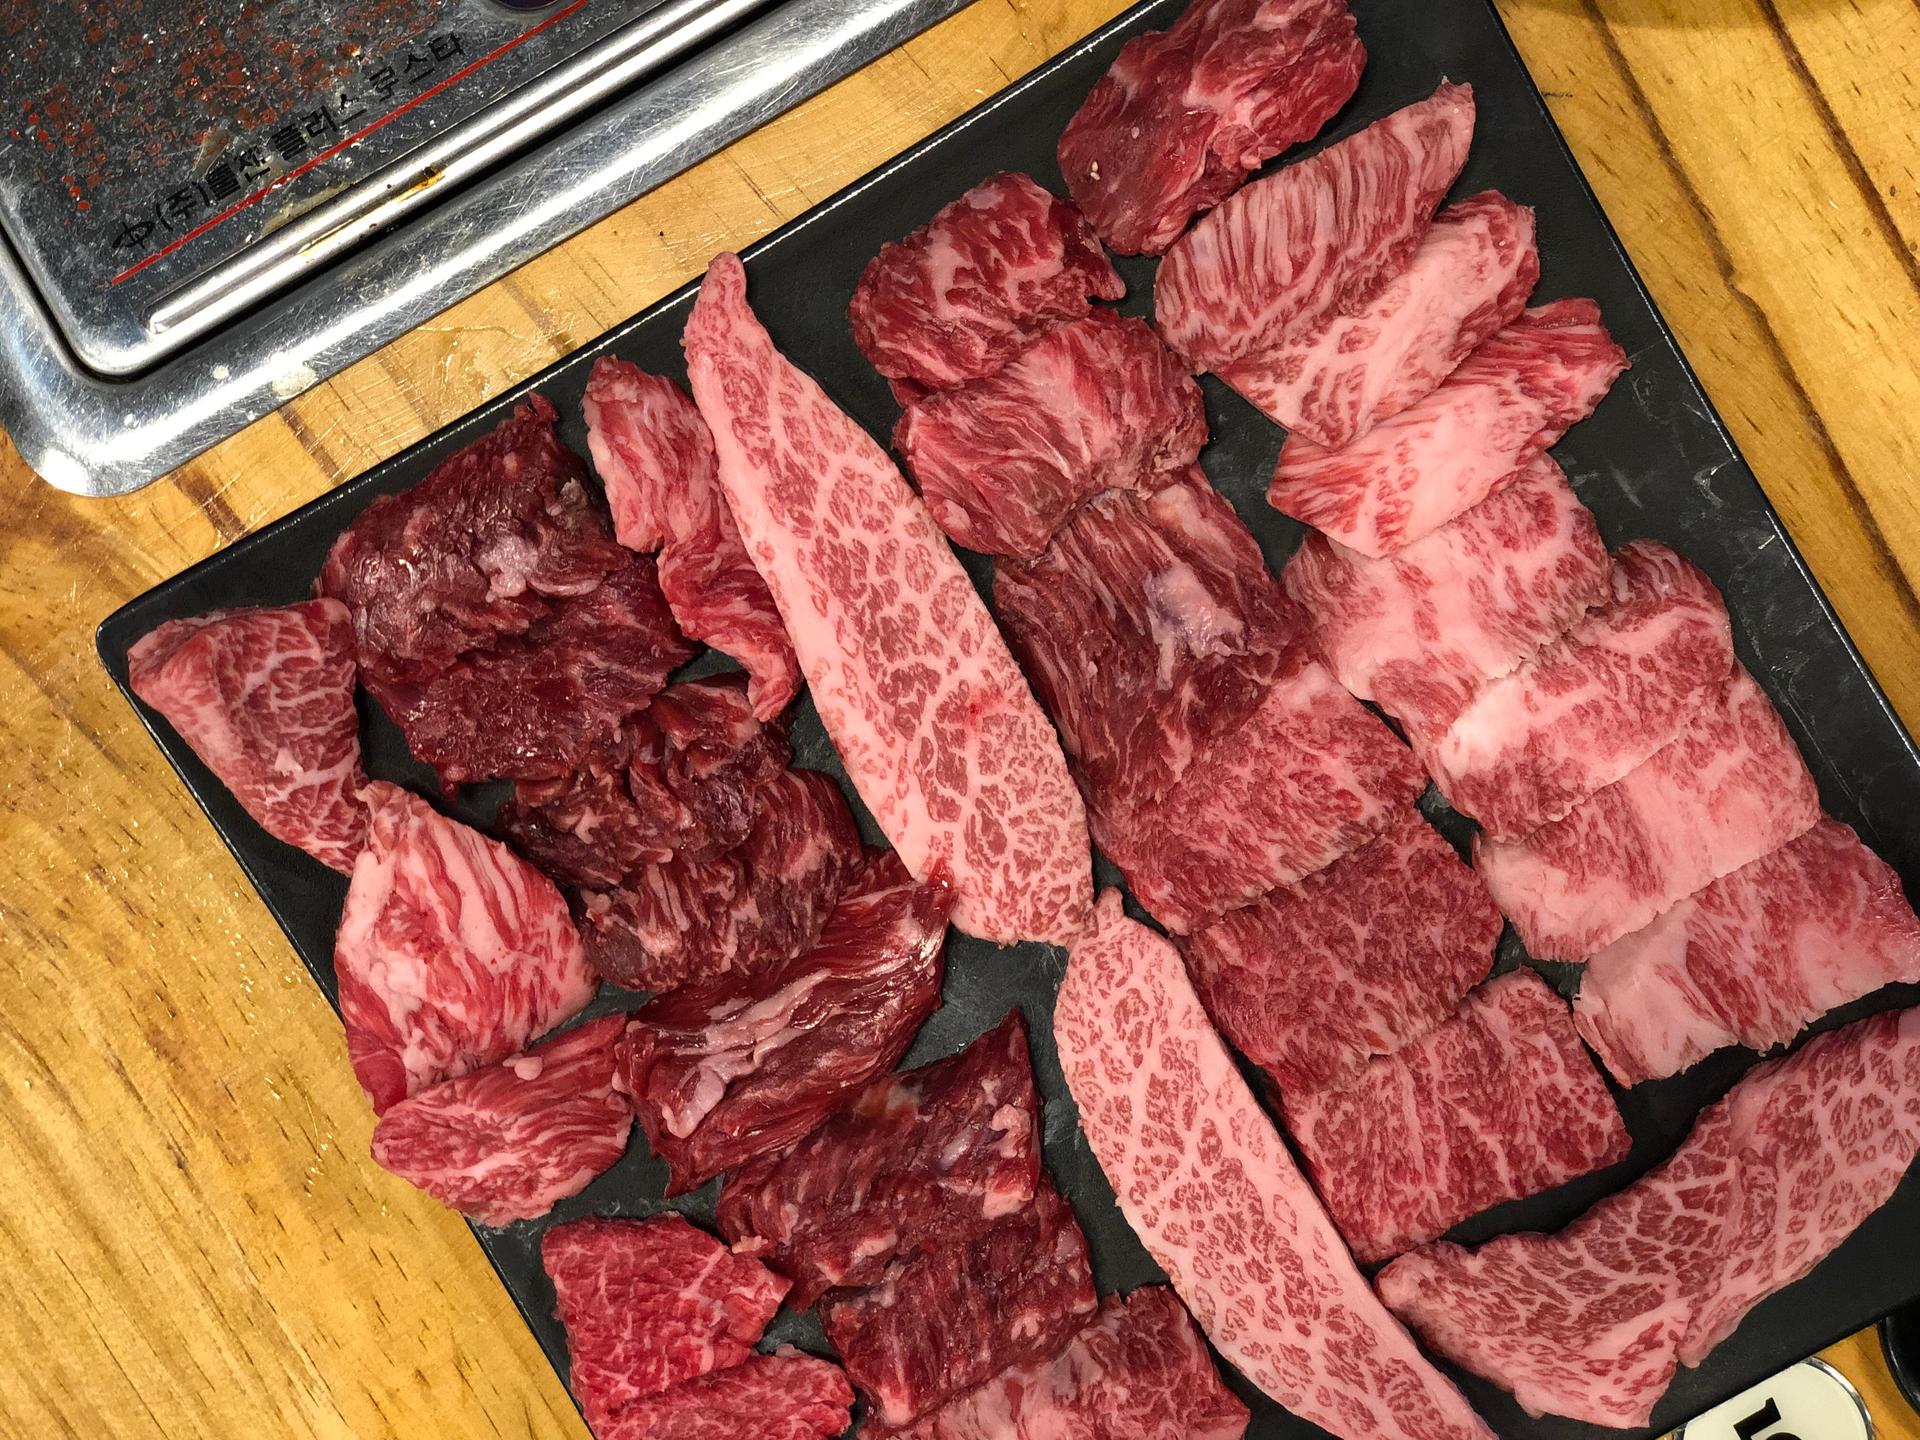 Delicious assortment of beef charcuterie including Mettwurst, Fuet and Salami from 마장골 in Seoul, Korea.